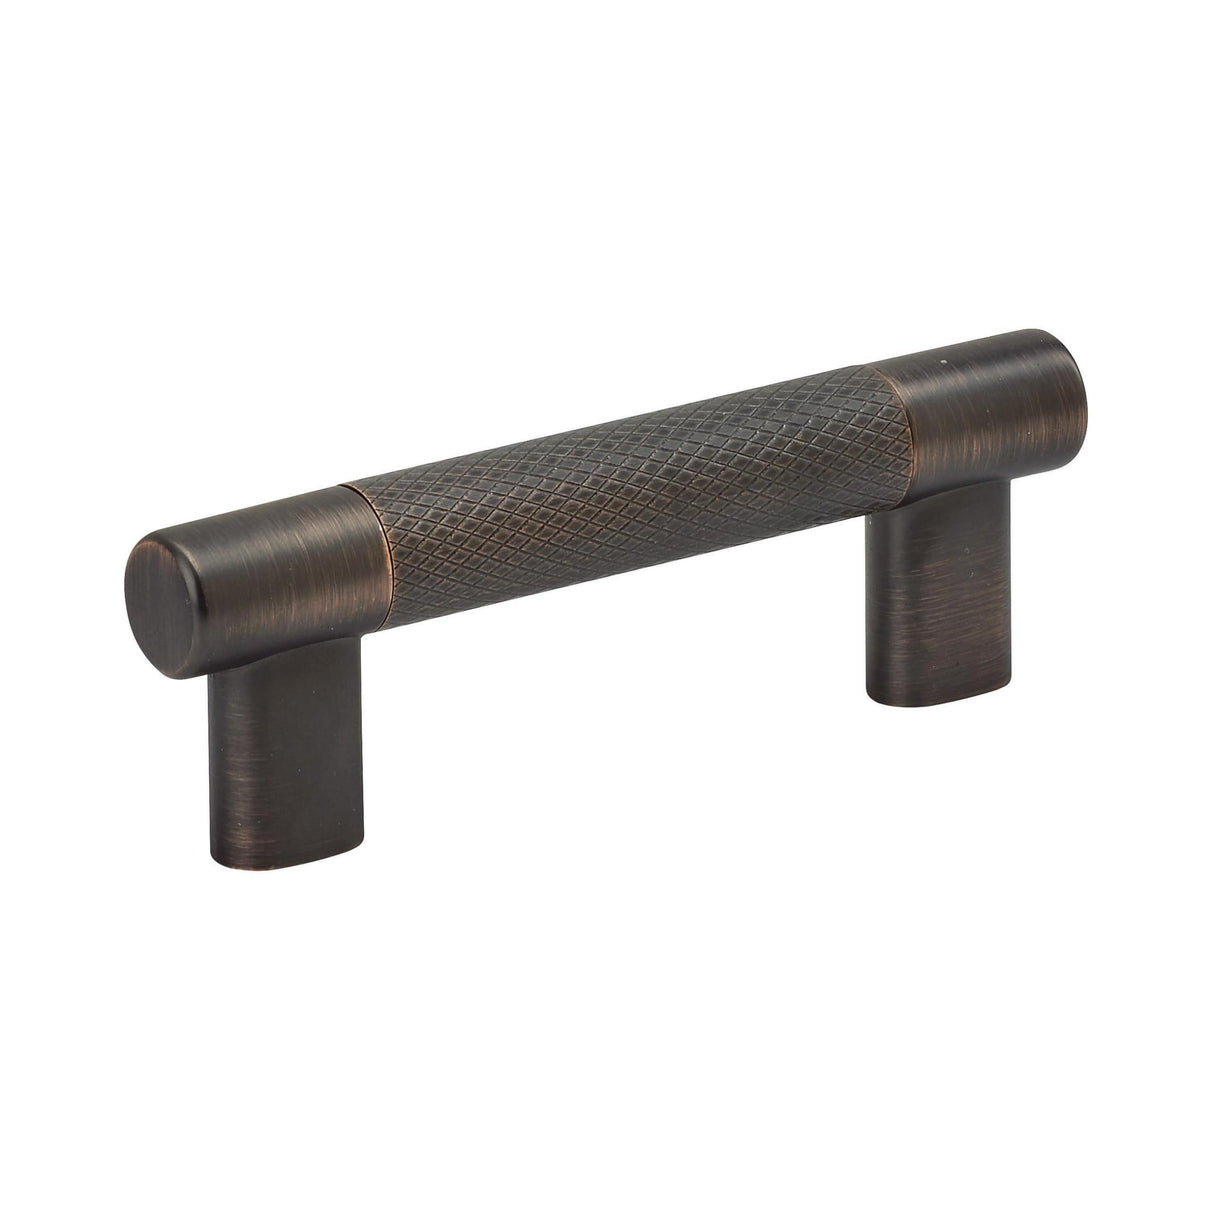 Amerock BP36557ORB Kitchen Cabinet Pull Oil Rubbed Bronze 3 in & -3/4 in (76 mm & 96 mm) Center-to-Center Bronx 1 Pack Furniture Hardware Cabinet Handle Bathroom Drawer Pull